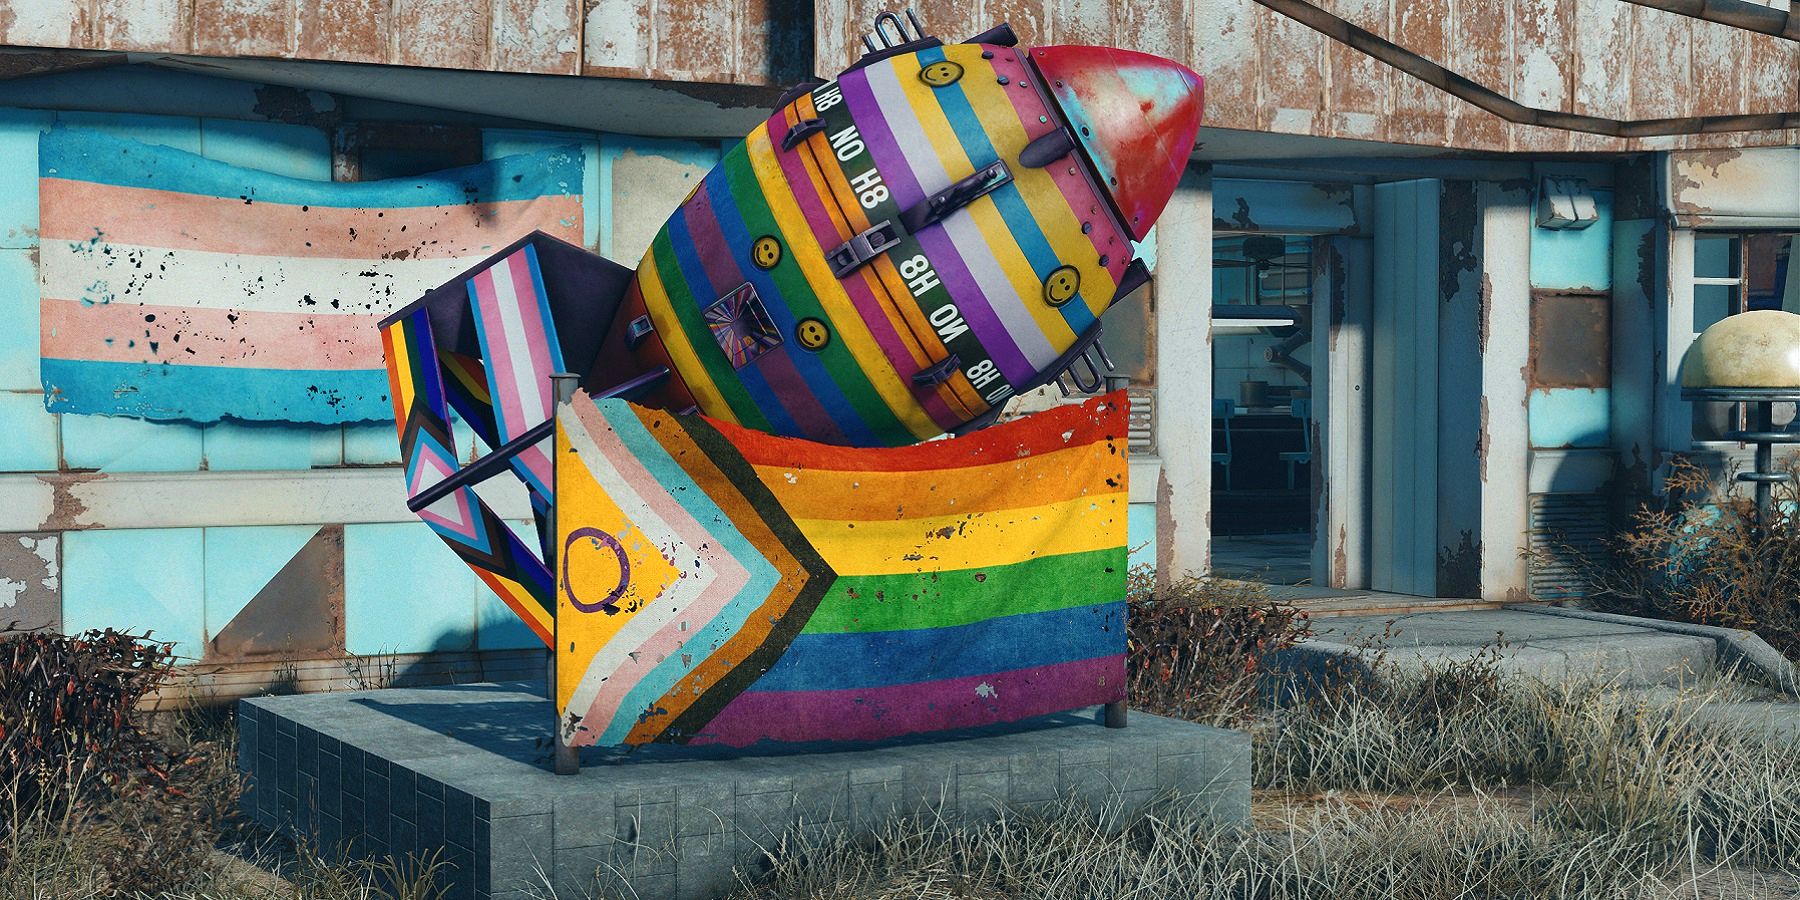 Image from Fallout 4 showing a large bomb and a flag in the Pride/Trans colors.